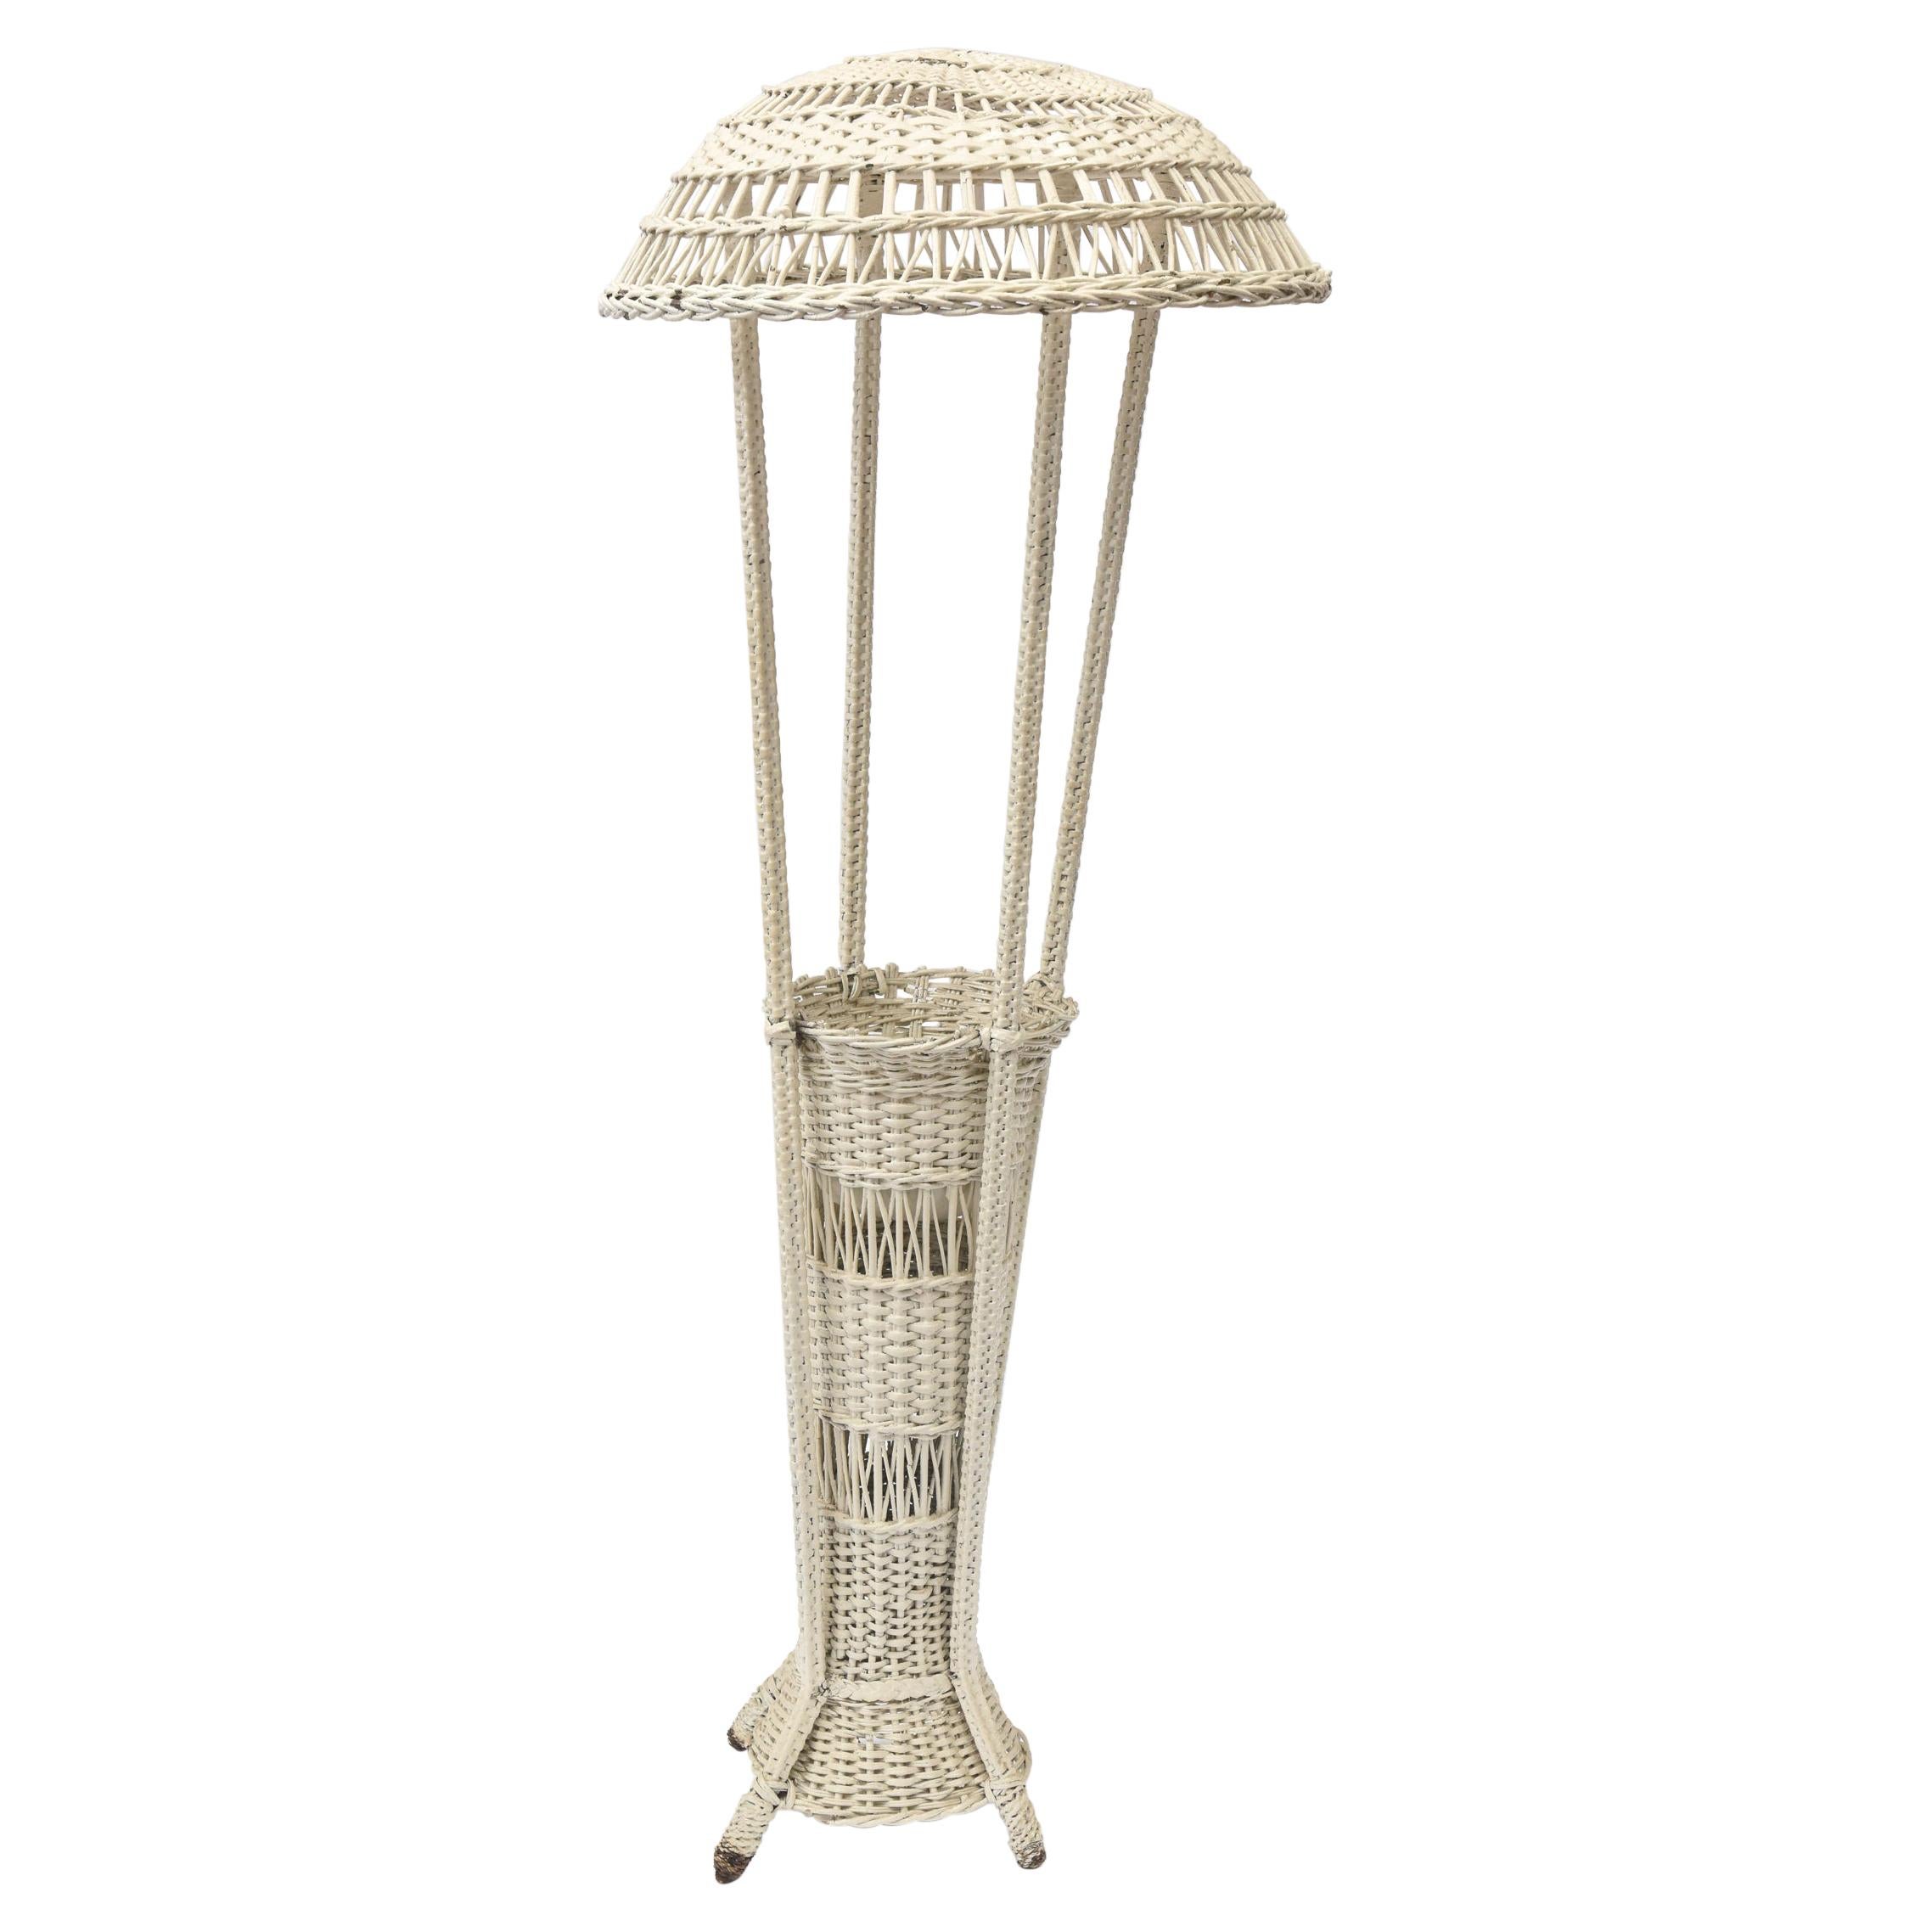 Wicker Standing Floor Lamp Early 20th Century with Flower Vase Insert Base For Sale